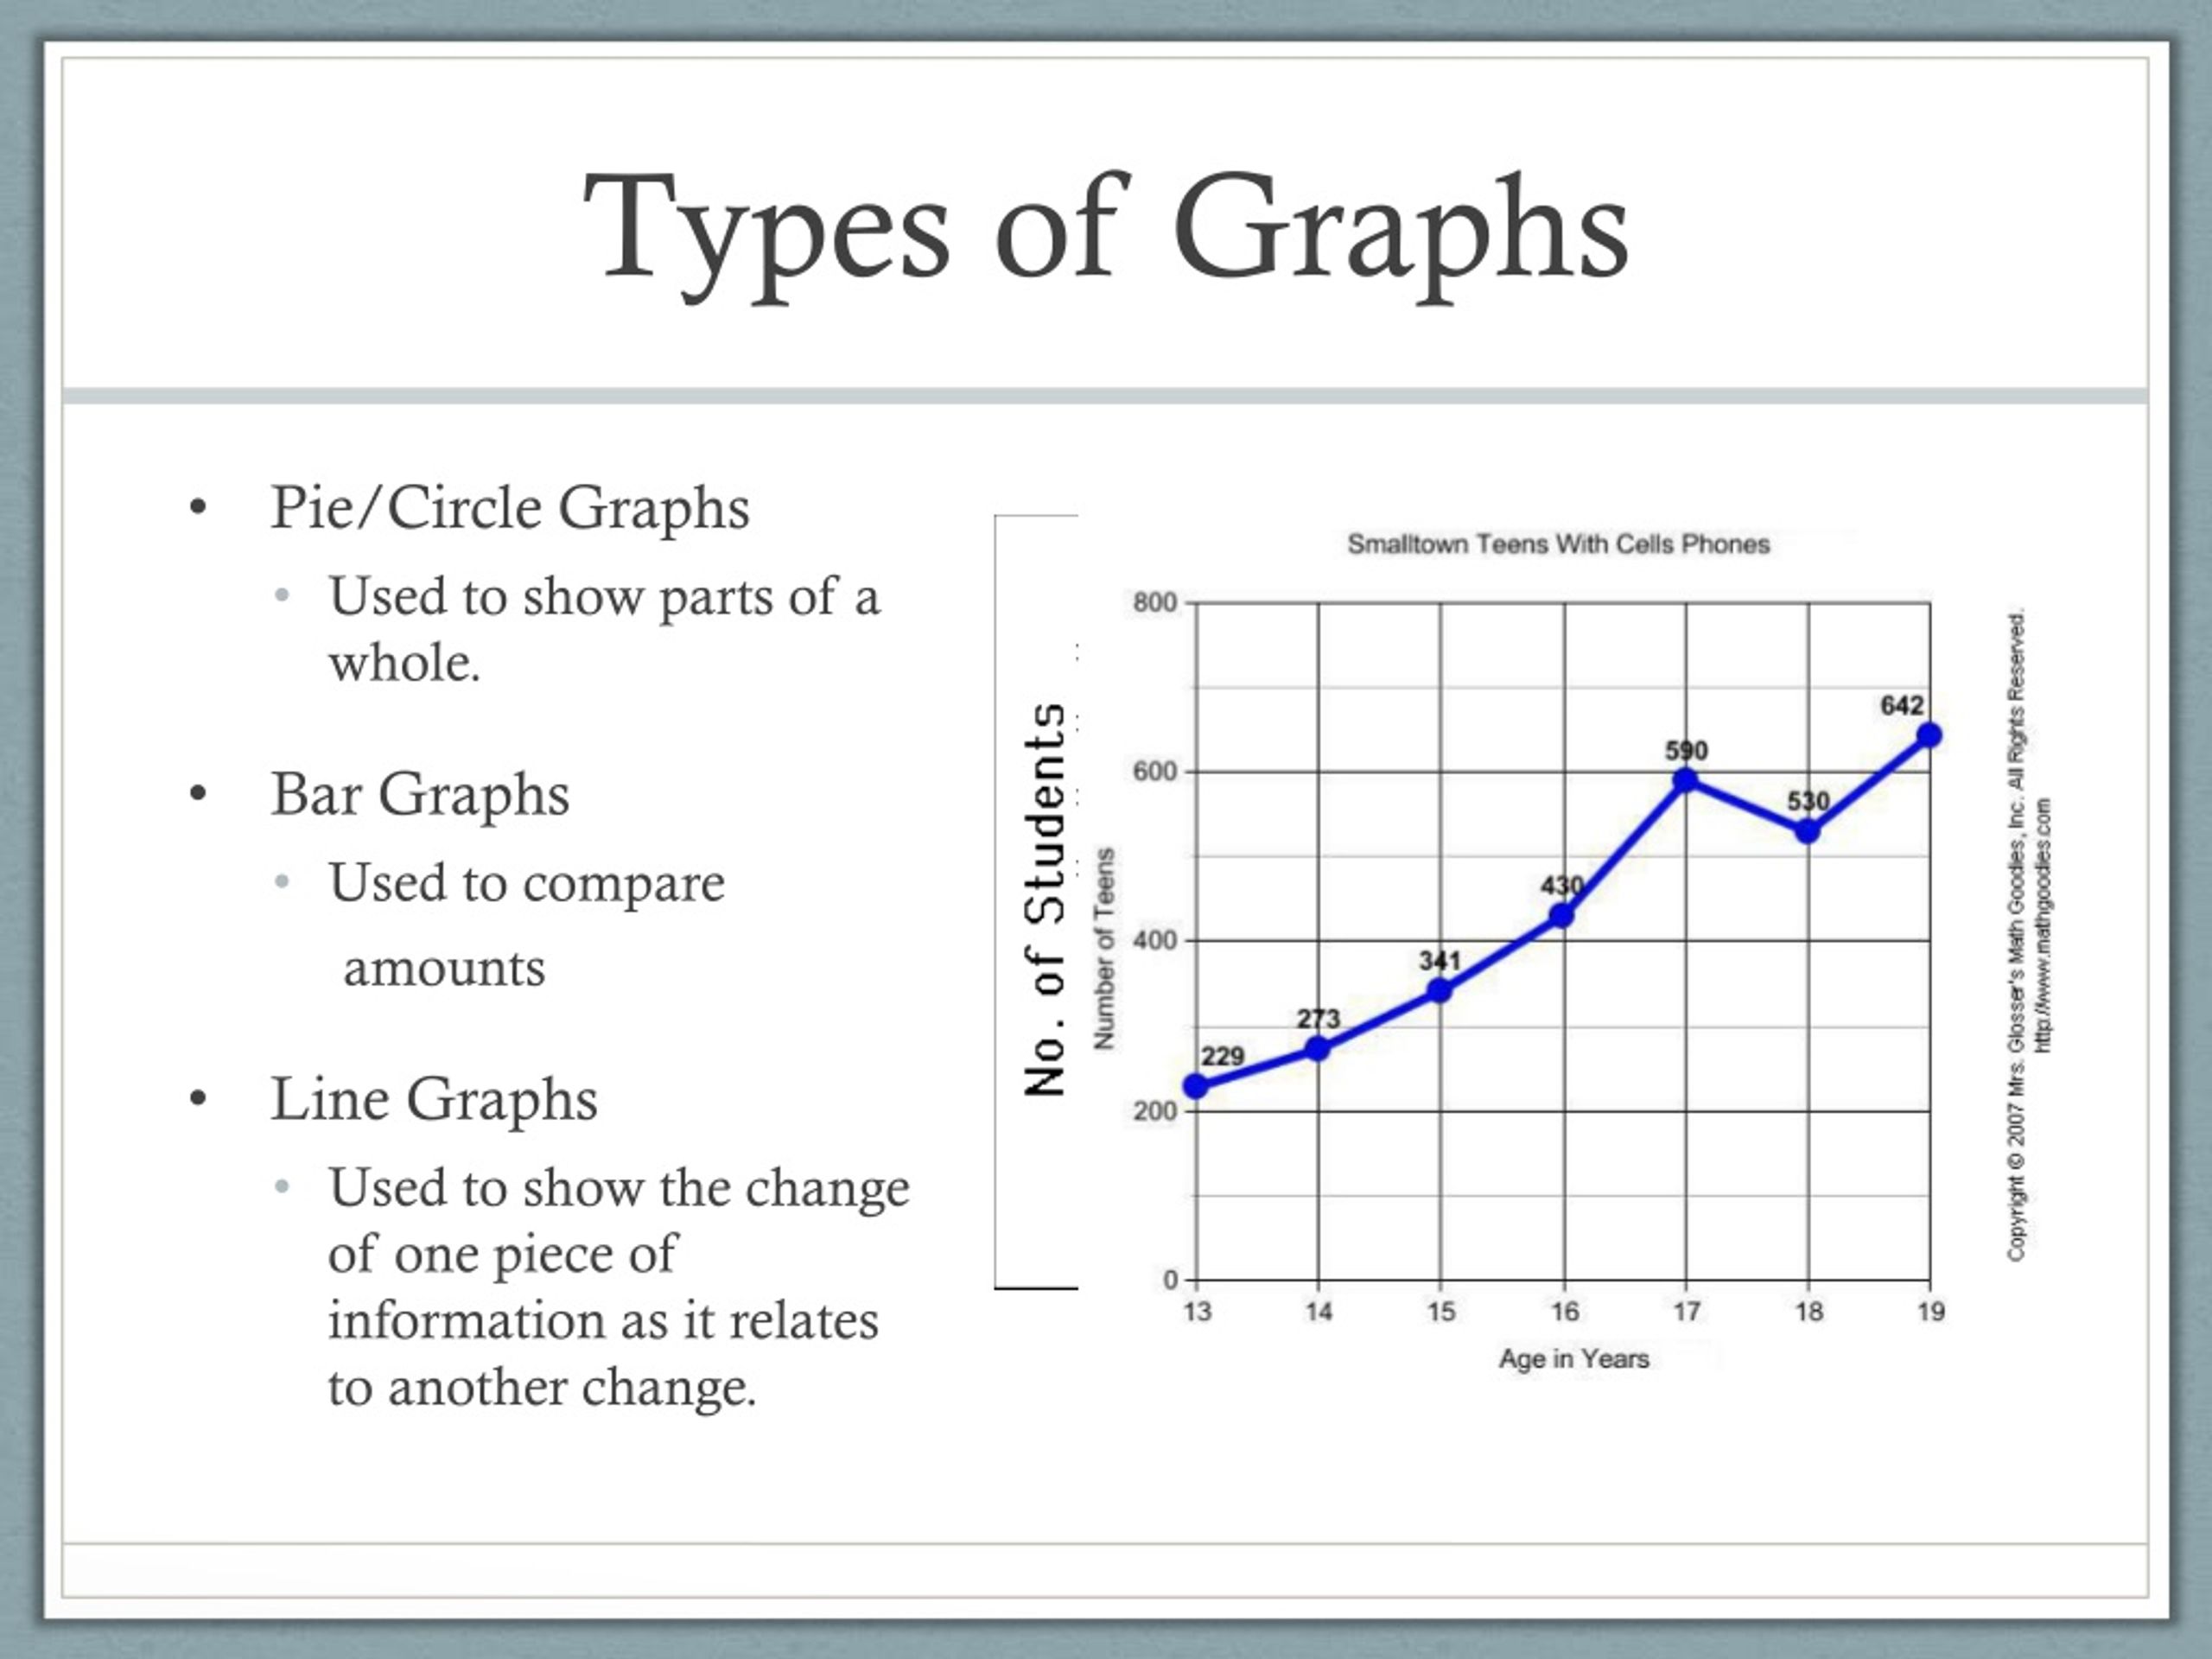 Type graphic. Types of graphs. Types of line graph. Bar line graph. Type of Linear graphs.